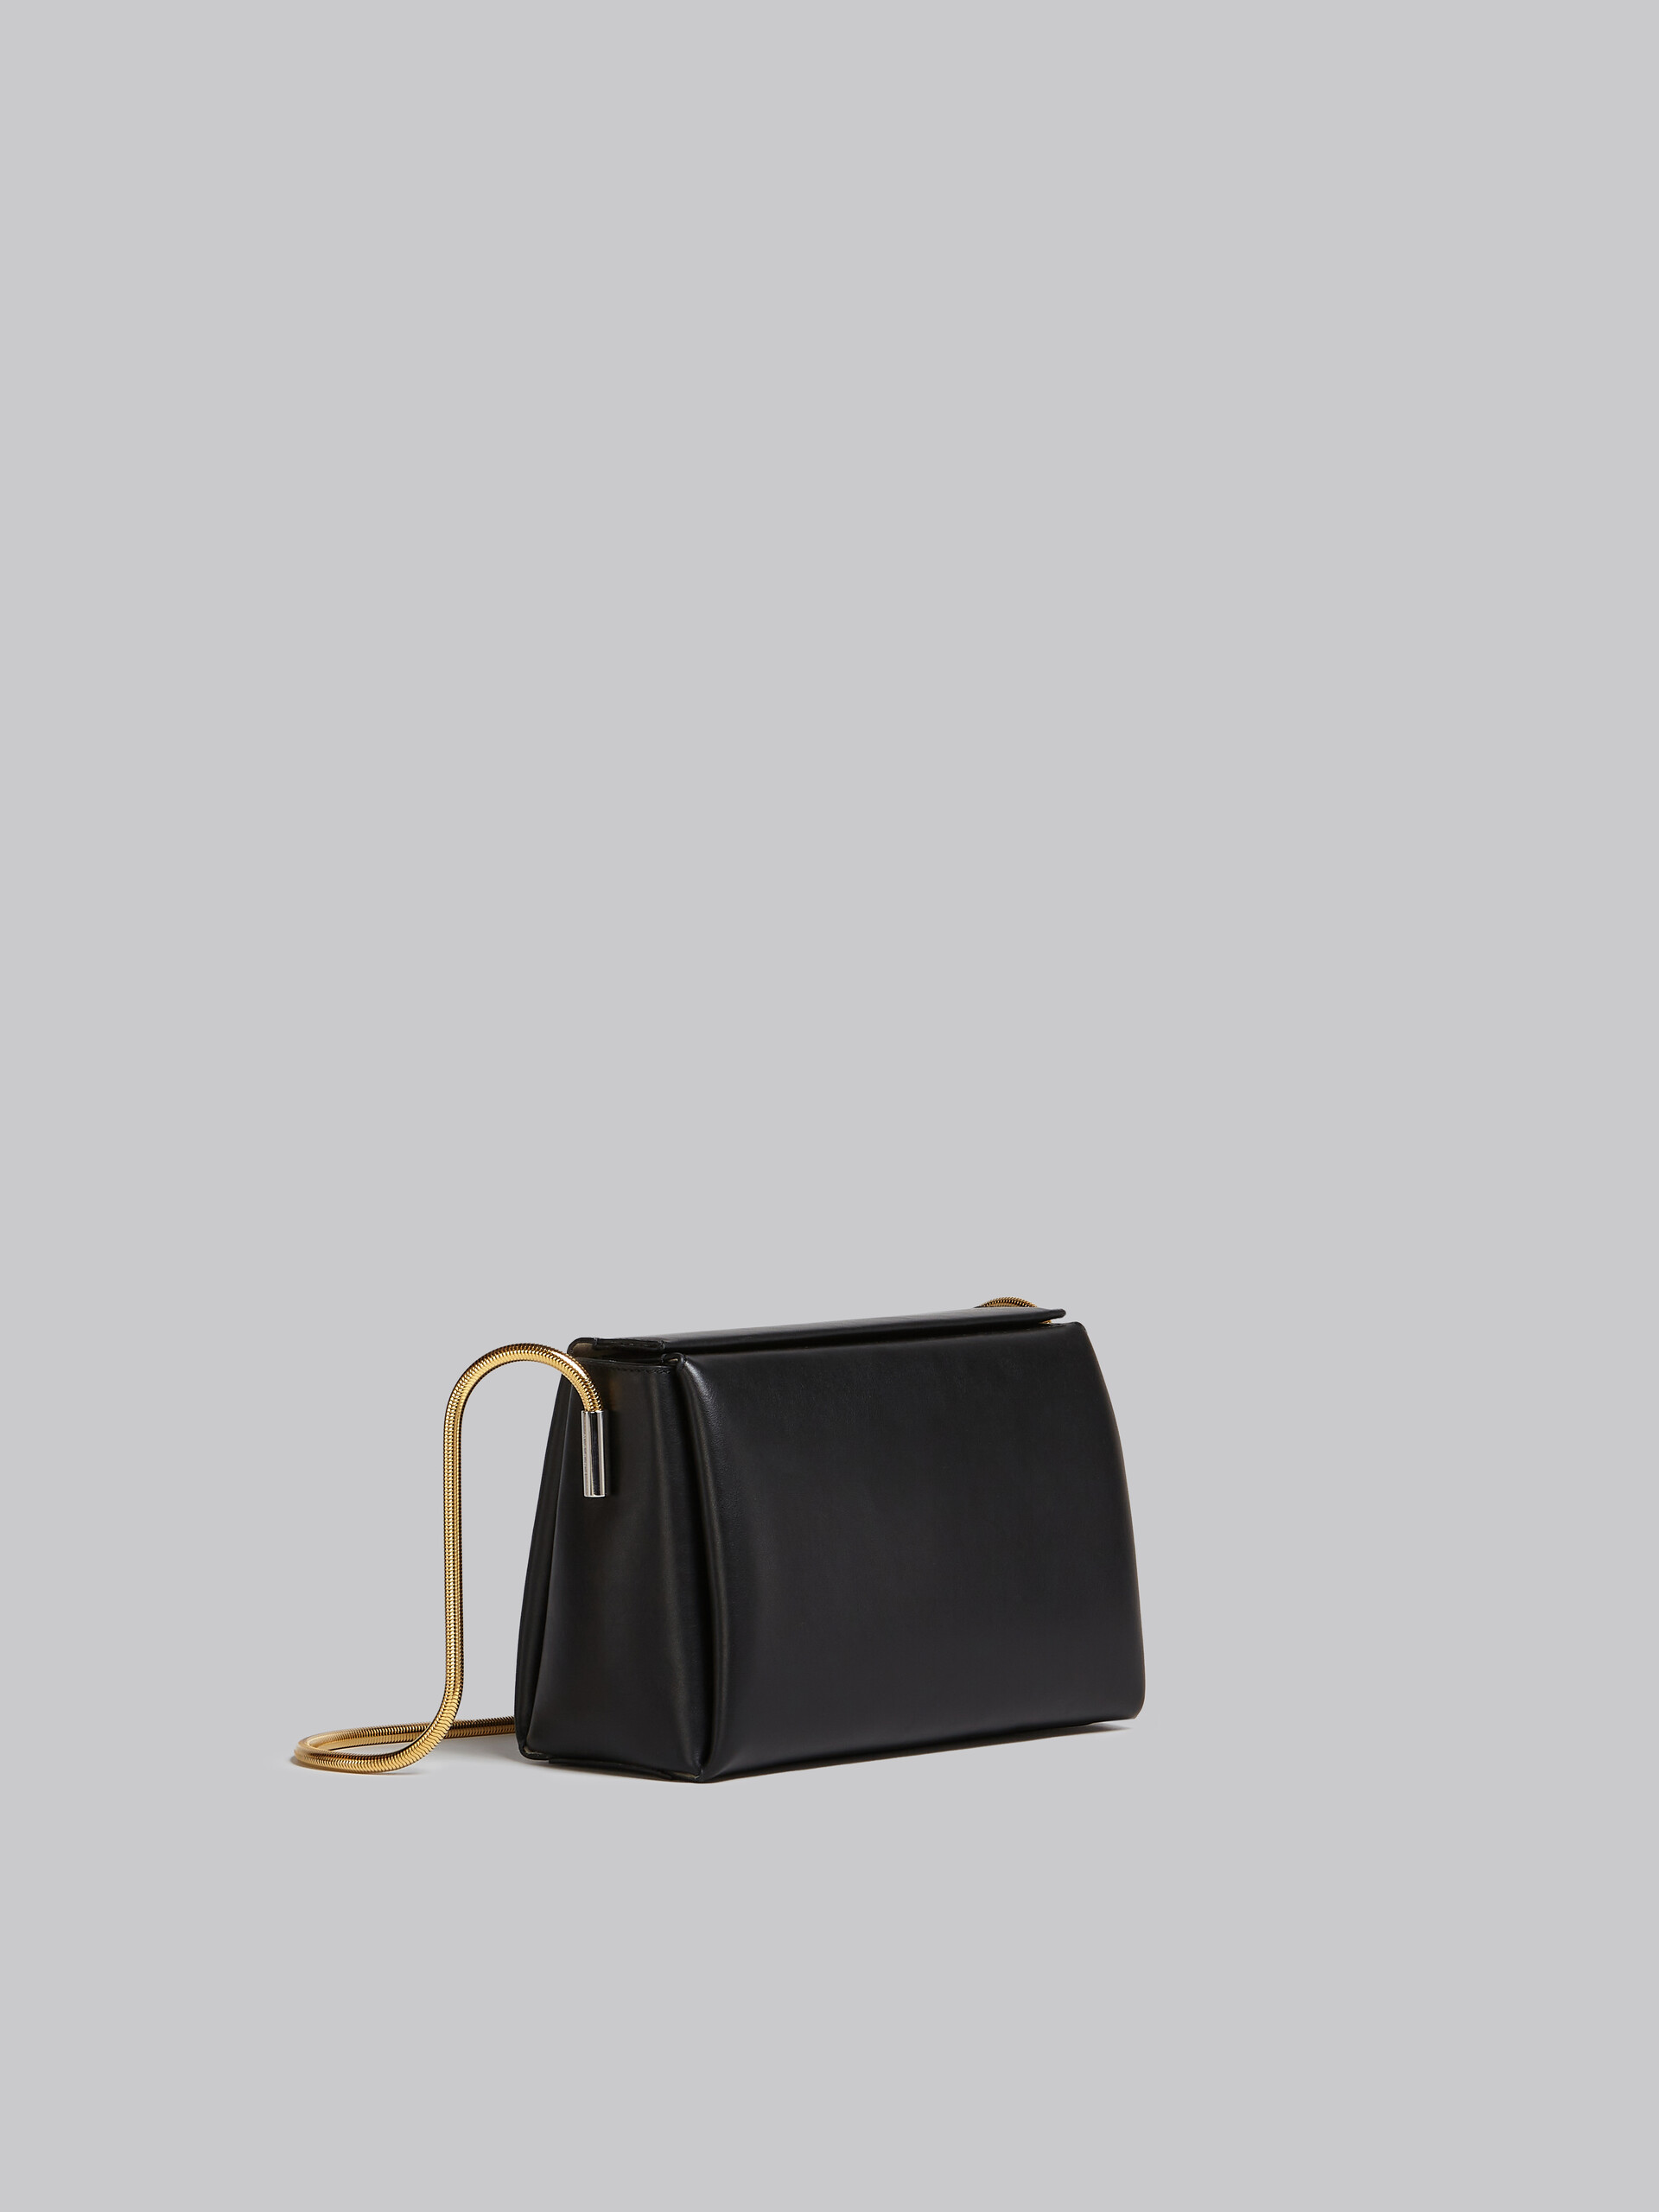 The Toggle Flap Crossbody Bag in Specchio Leather